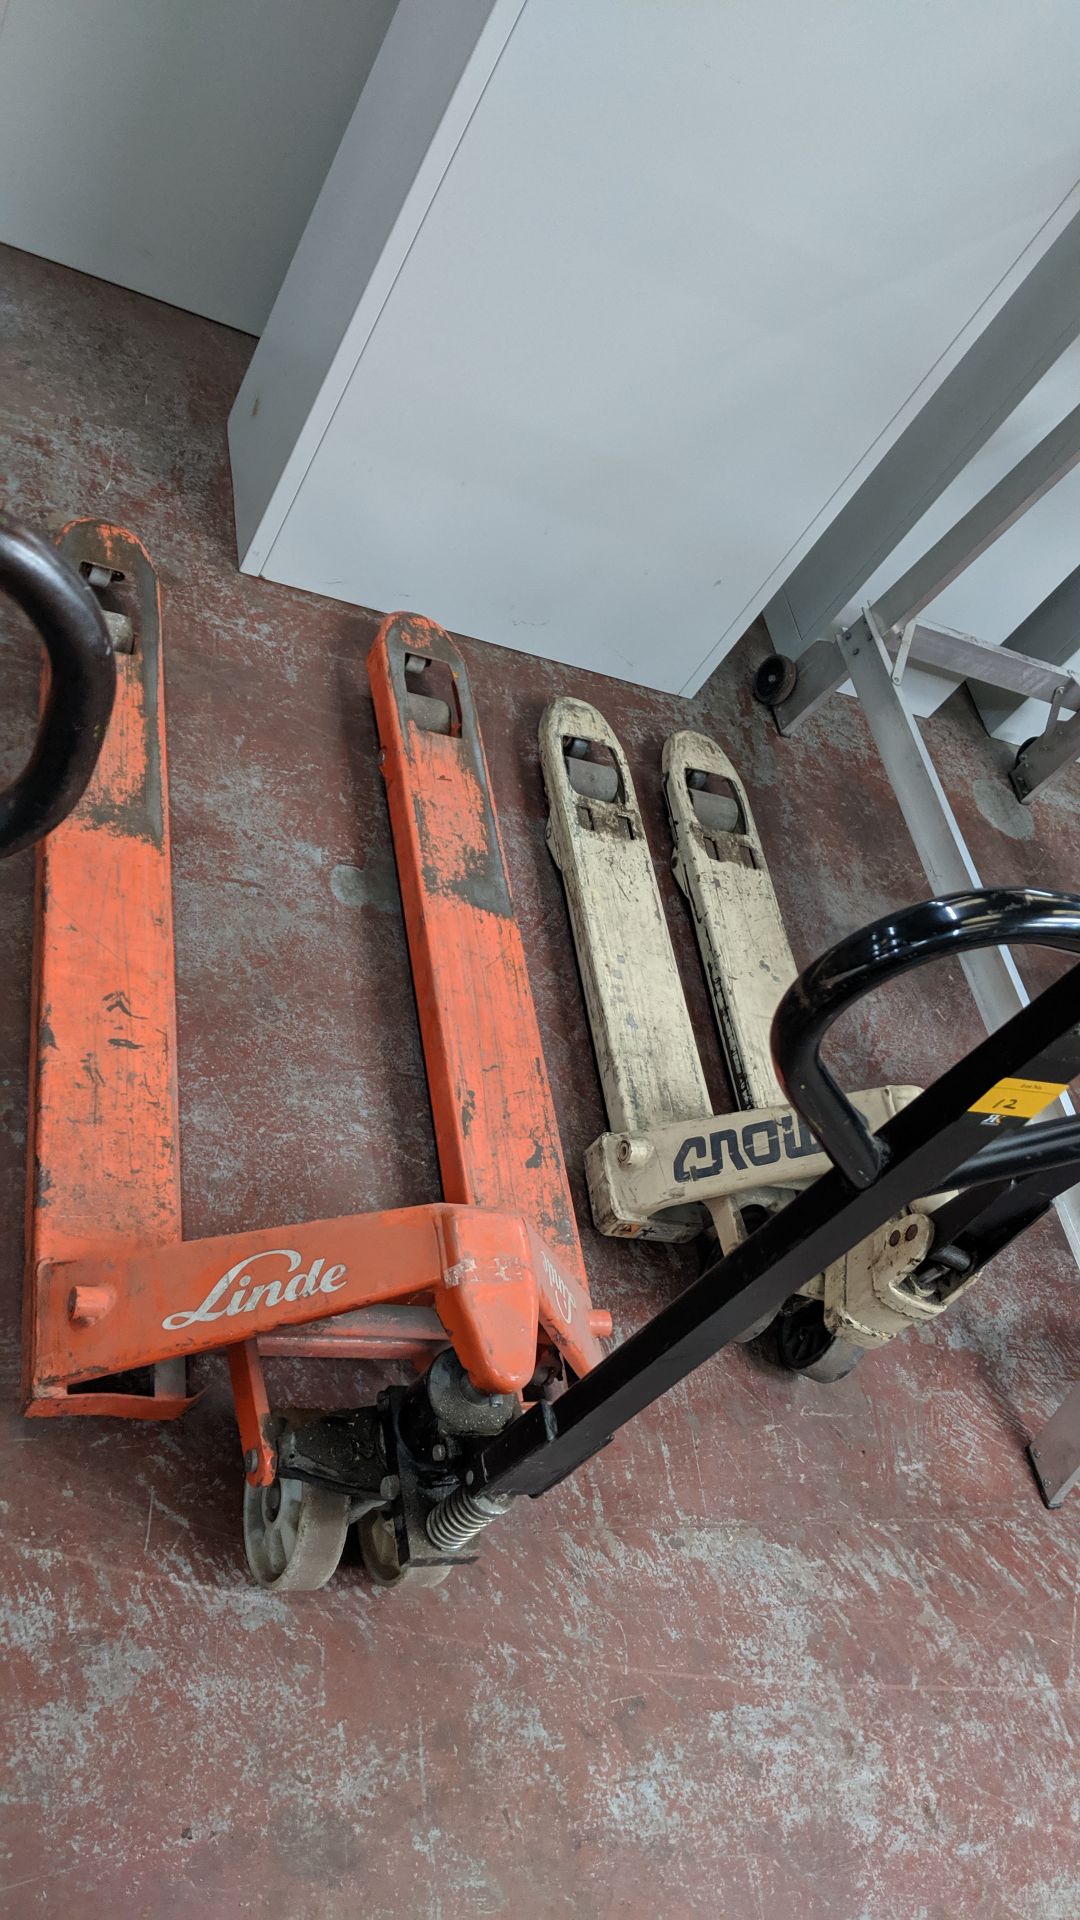 Linde pallet truck. This is one of a number of lots being sold on behalf of the liquidator of a - Image 2 of 2